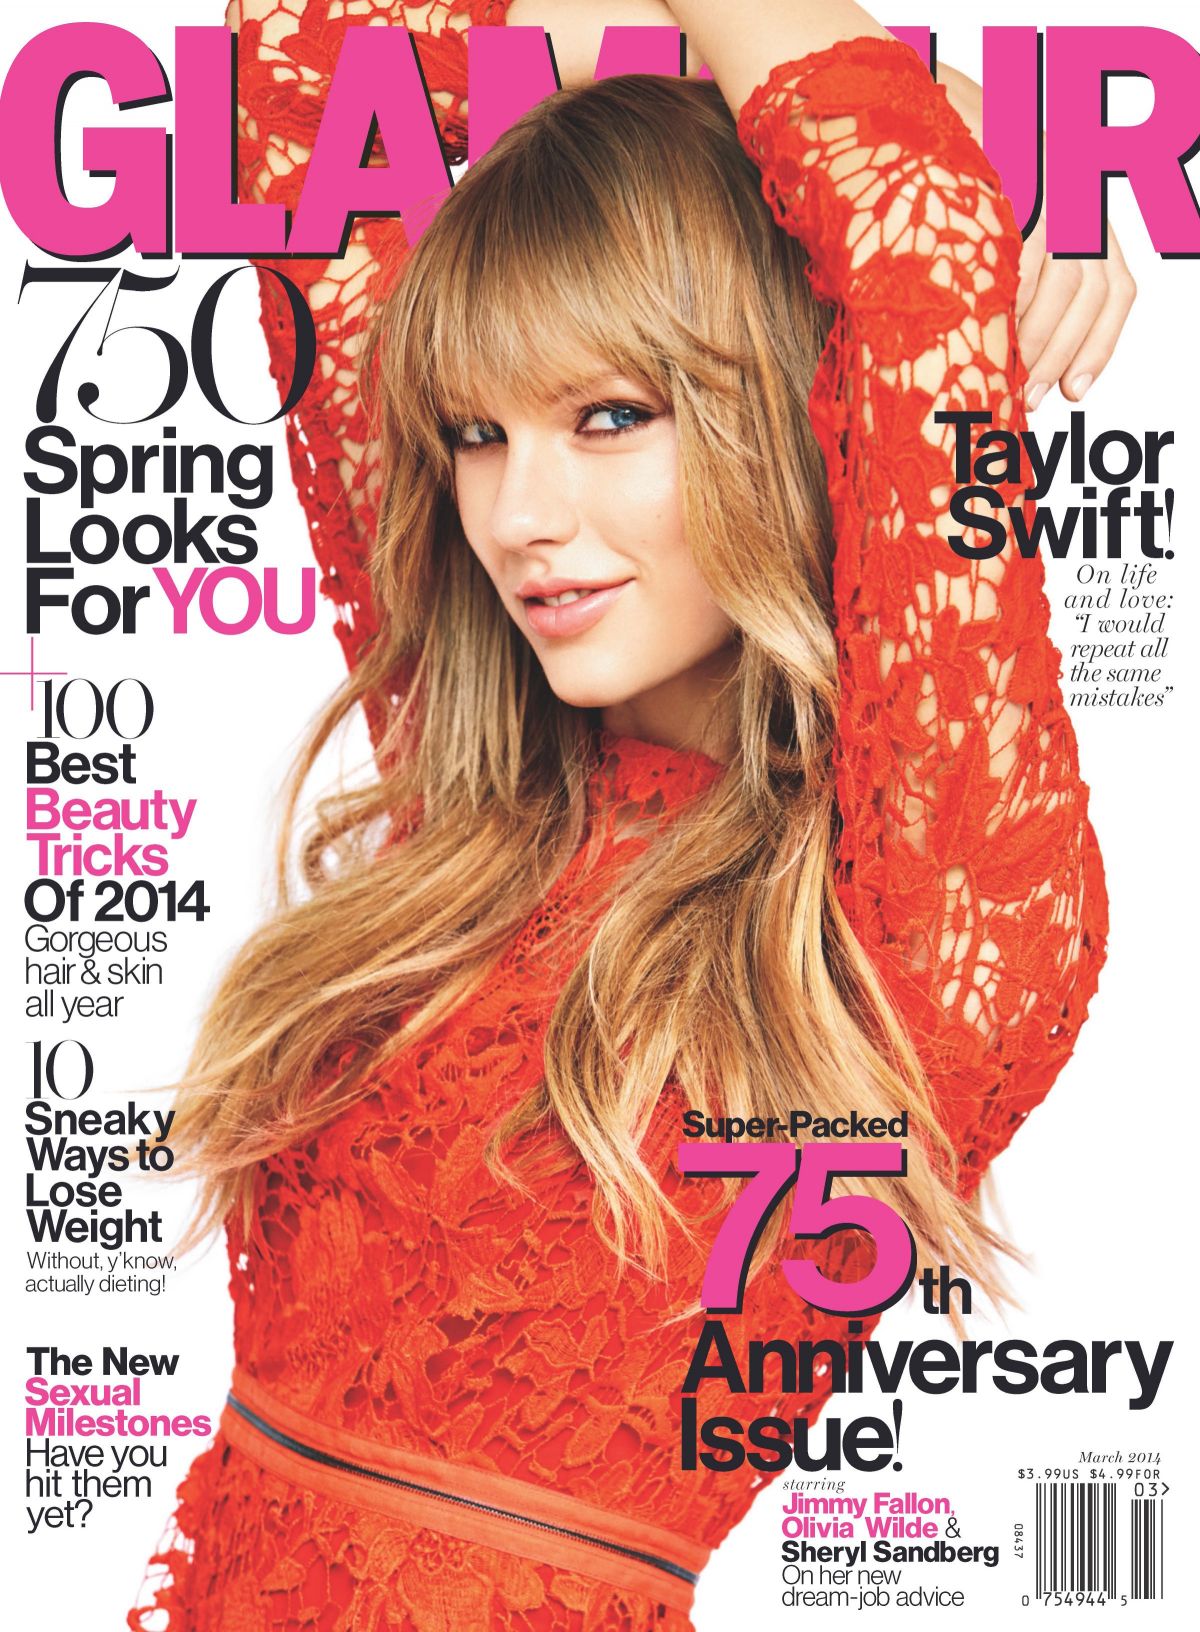 TAYLOR SWIFT on the Cover of Glamour Magazine, March 2014 Issue